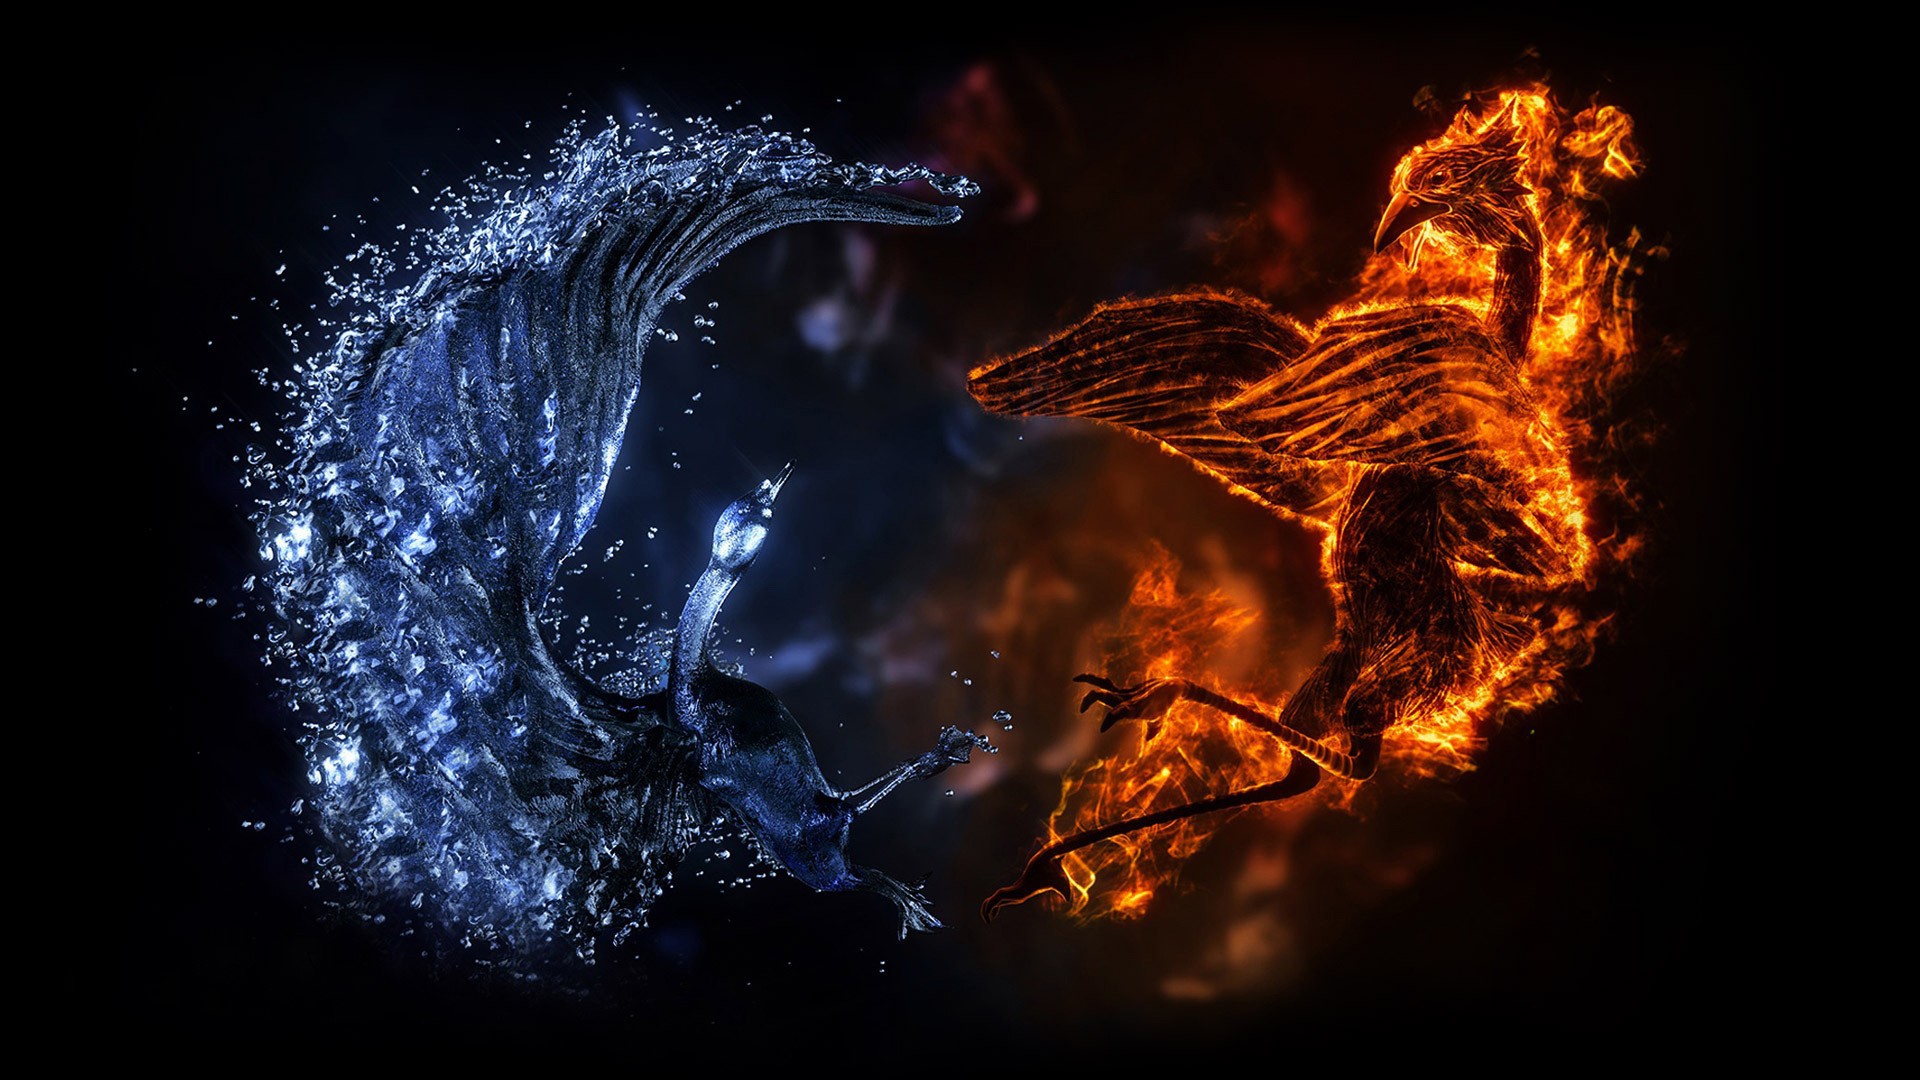 Battle of fire and water dragons wallpapers and images ...